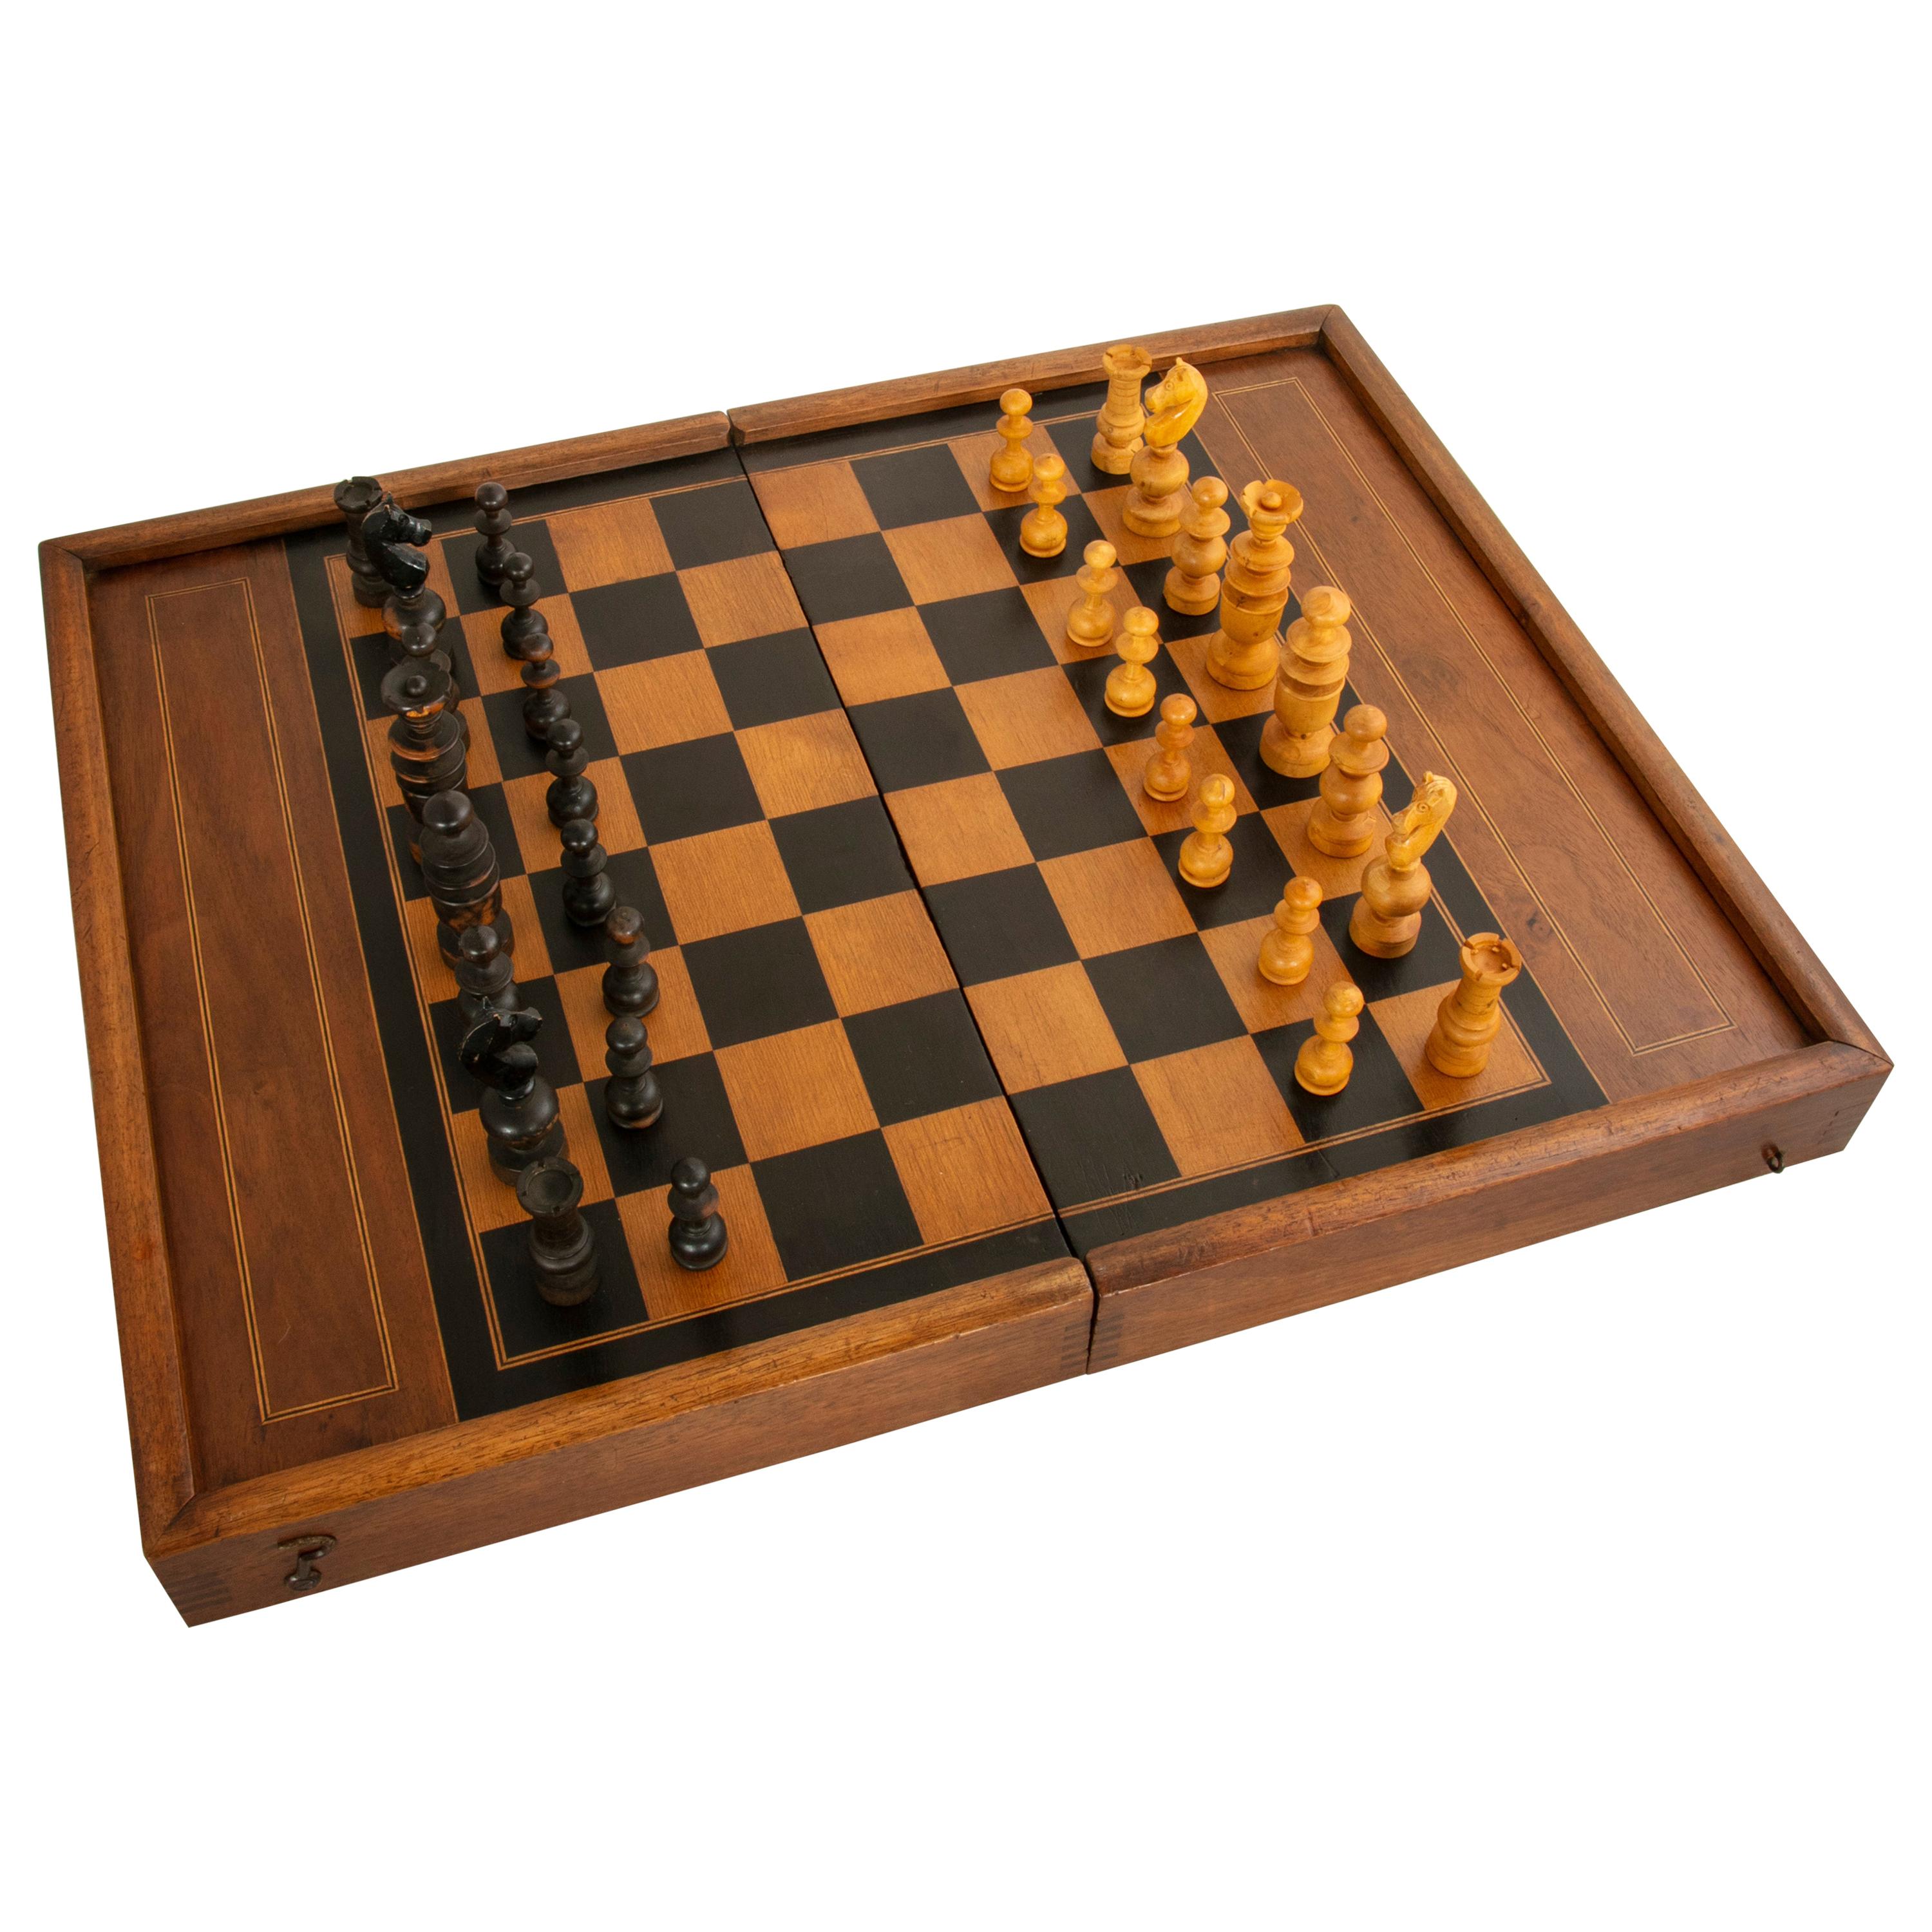 Walnut Marquetry Folding Game Box, with Chess, Checkers, Backgammon, circa 1900